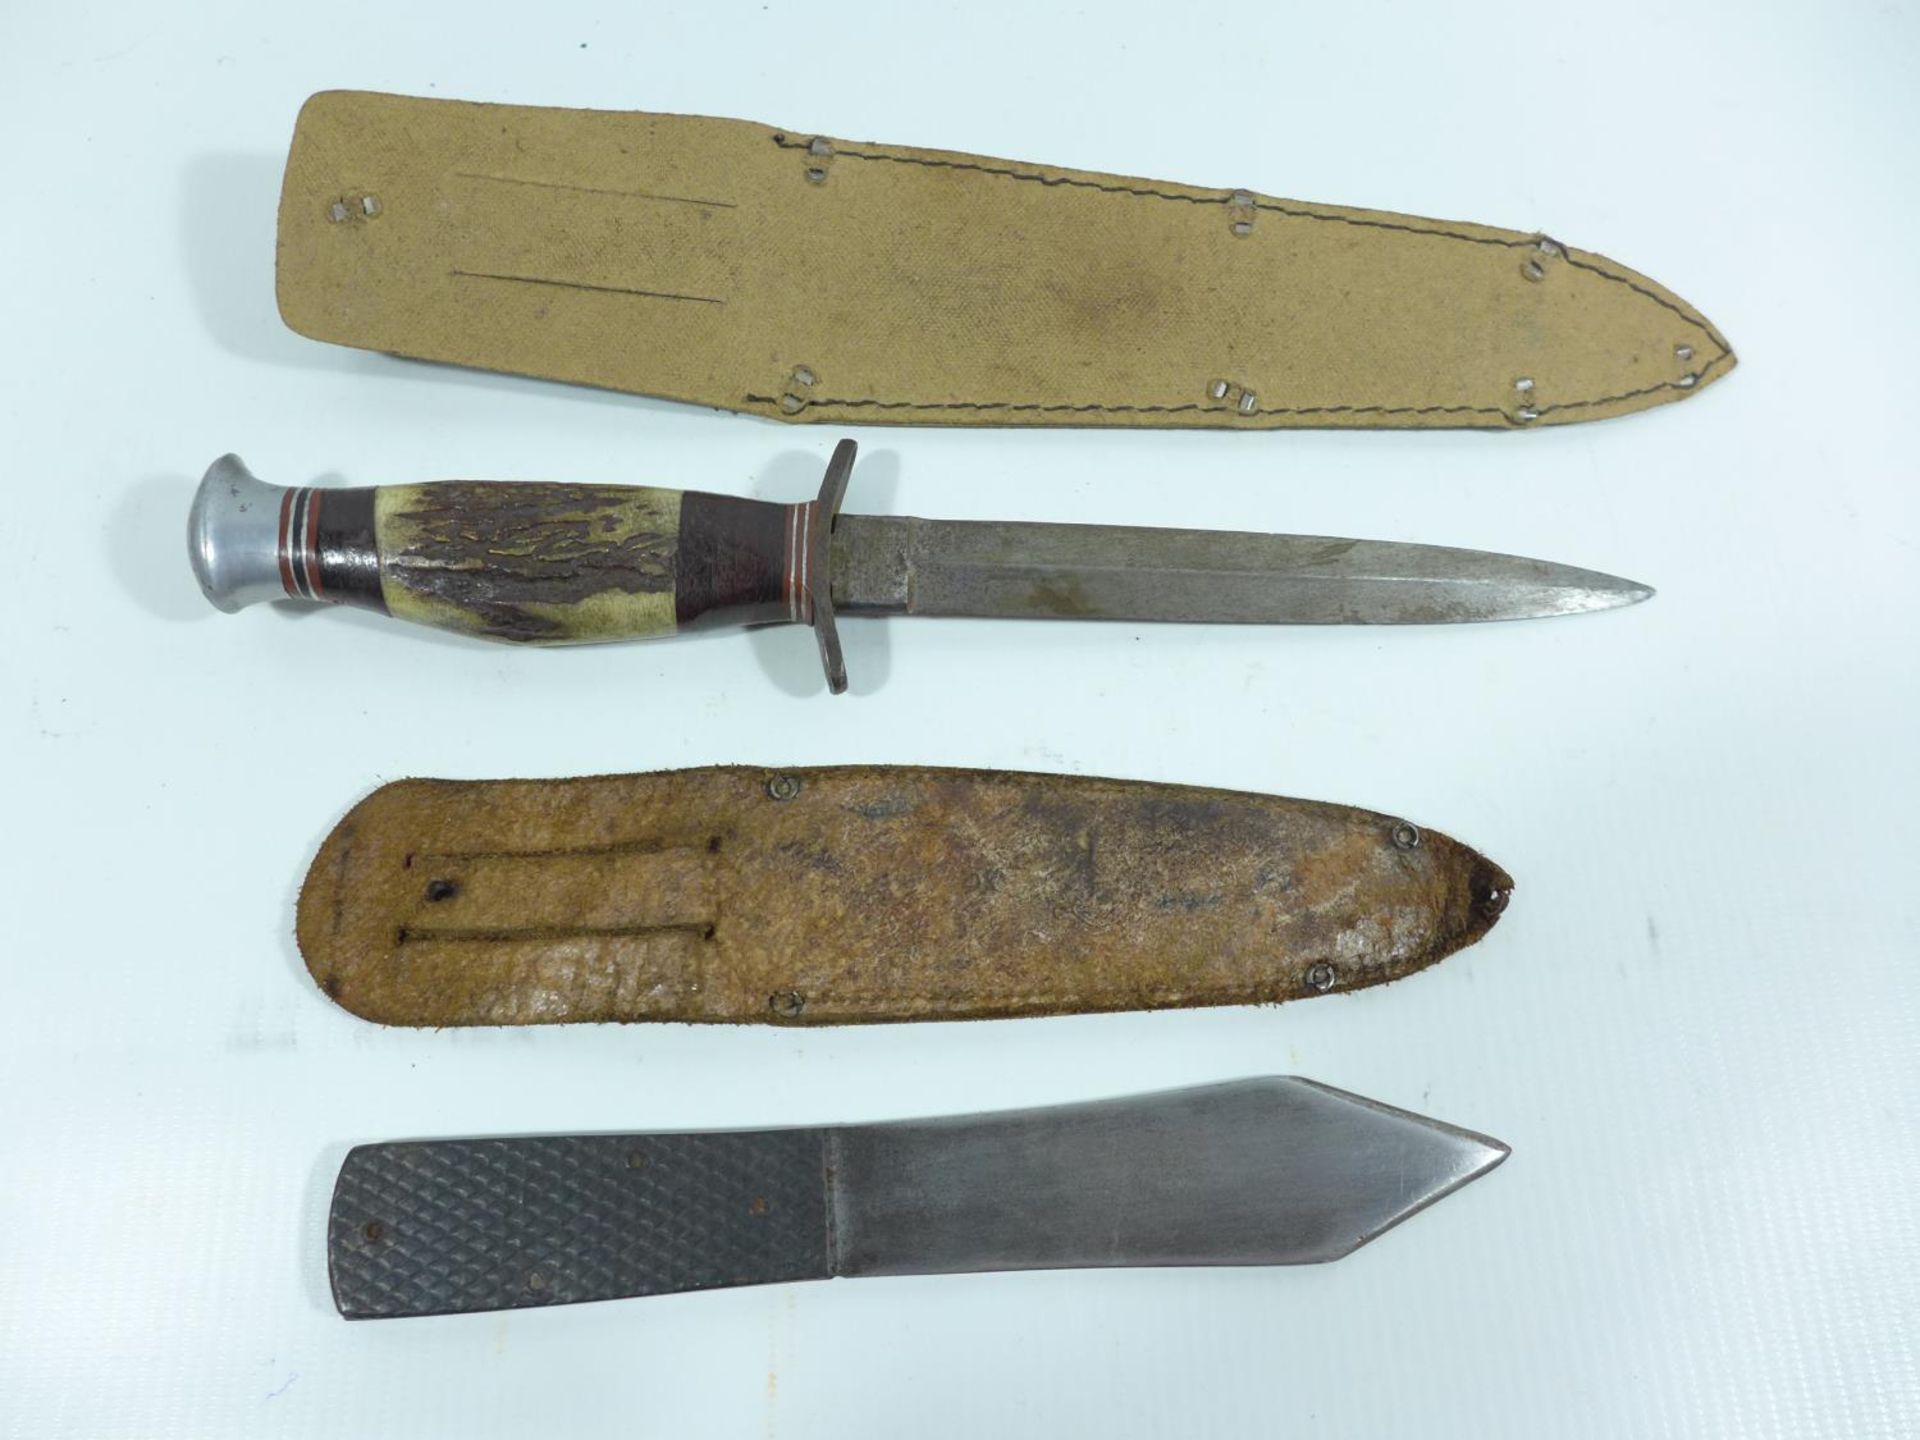 A HUNTING KNIFE AND SCABBARD, 15CM BLADE, LENGTH 26.5CM, THROWING KNIFE AND SCABBARD, 11CM BLADE, - Image 2 of 4